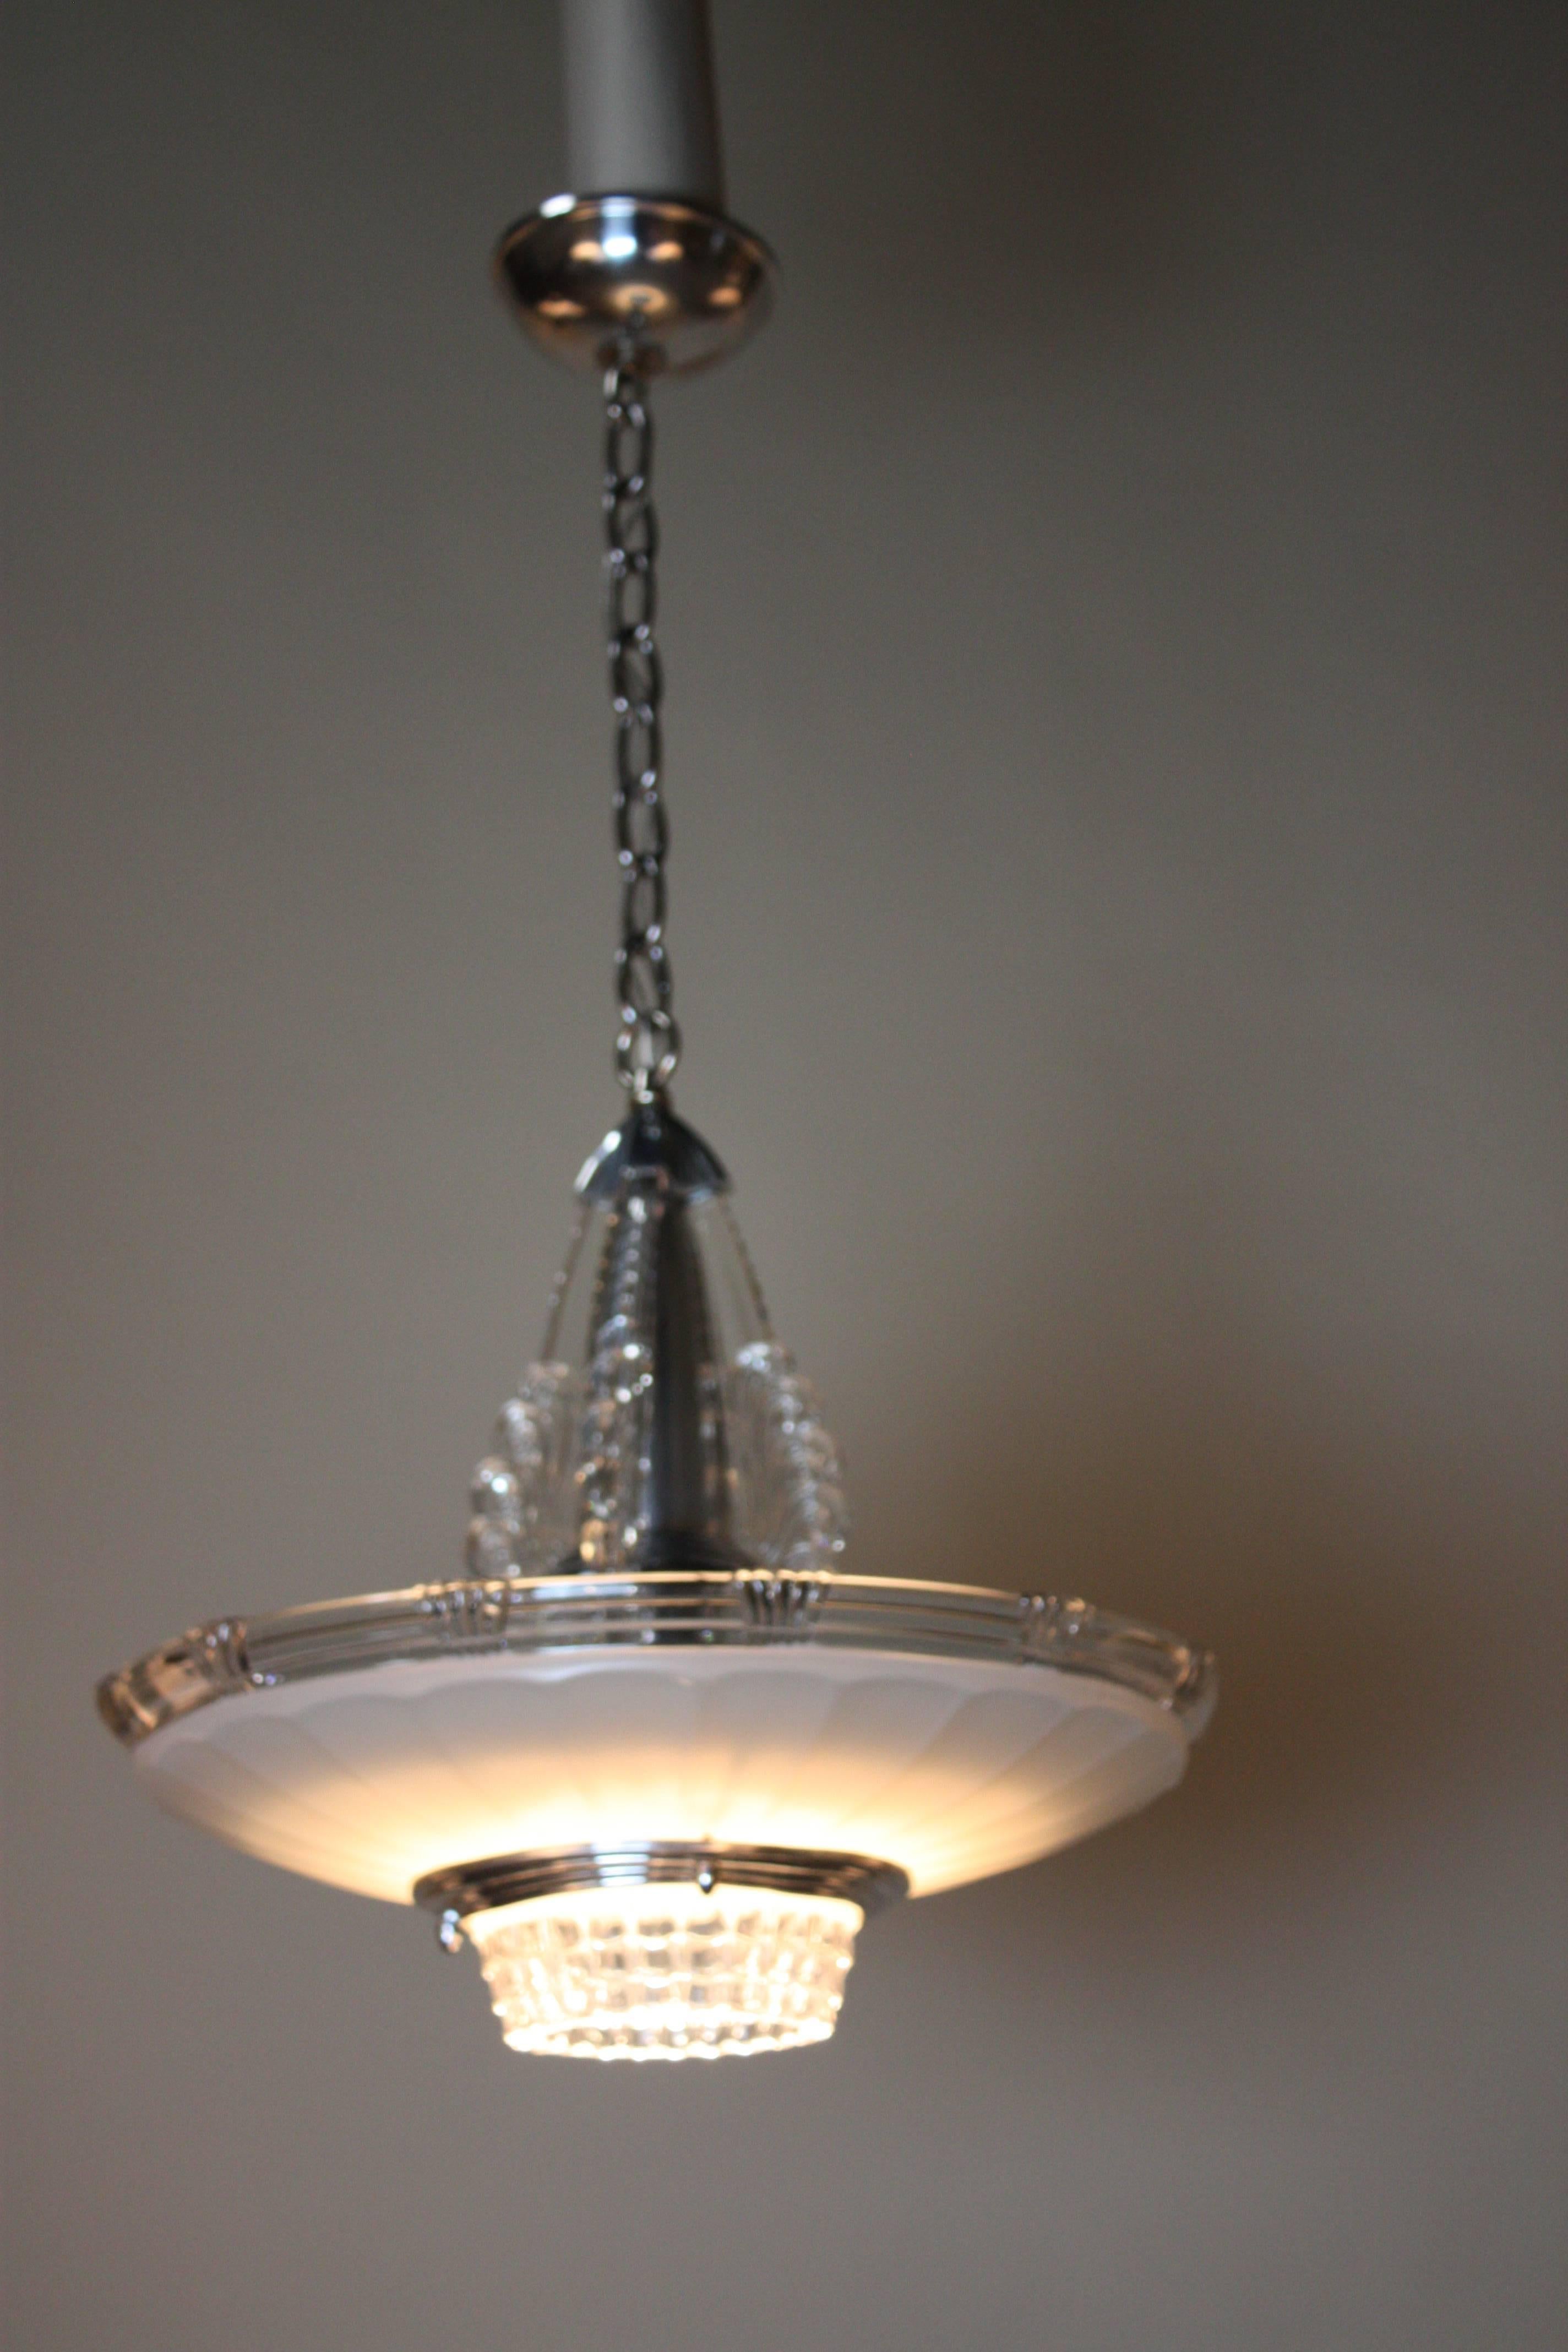 An elegant 1930s American Art Deco chandelier. Glass is combination of cream color and clear with polished aluminium hardware.